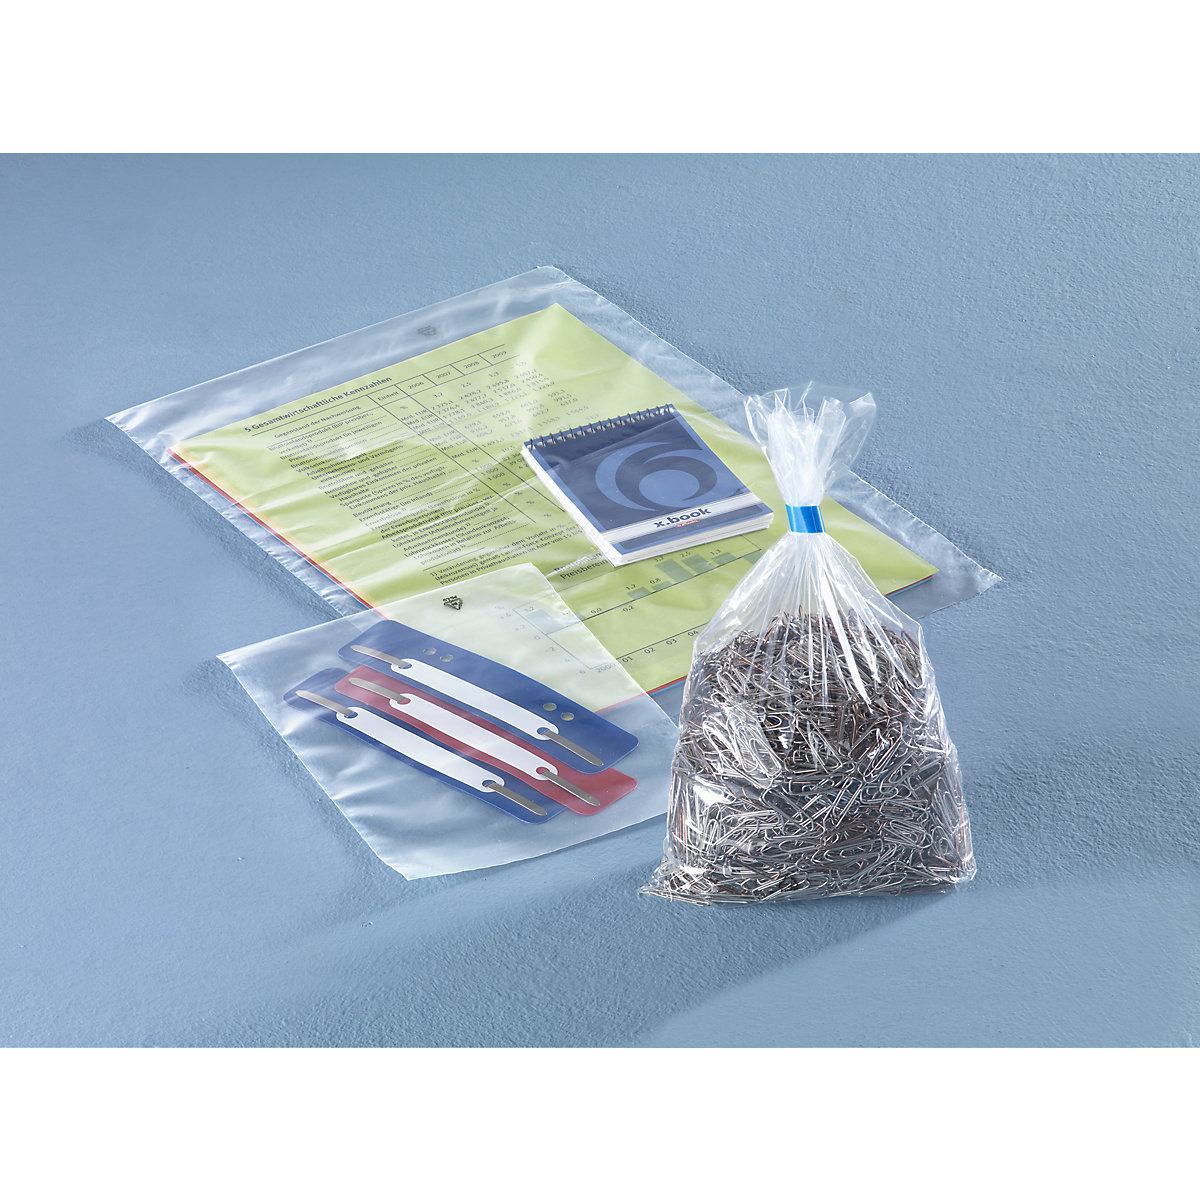 Buy BAG INC | Pack of 100 Pcs | Transparent Plastic Poly Bag Sealable |  BOPP Poly Bags Self Adhesive Thick 51 Micron (10x12 Inch) Online at Low  Prices in India - Amazon.in